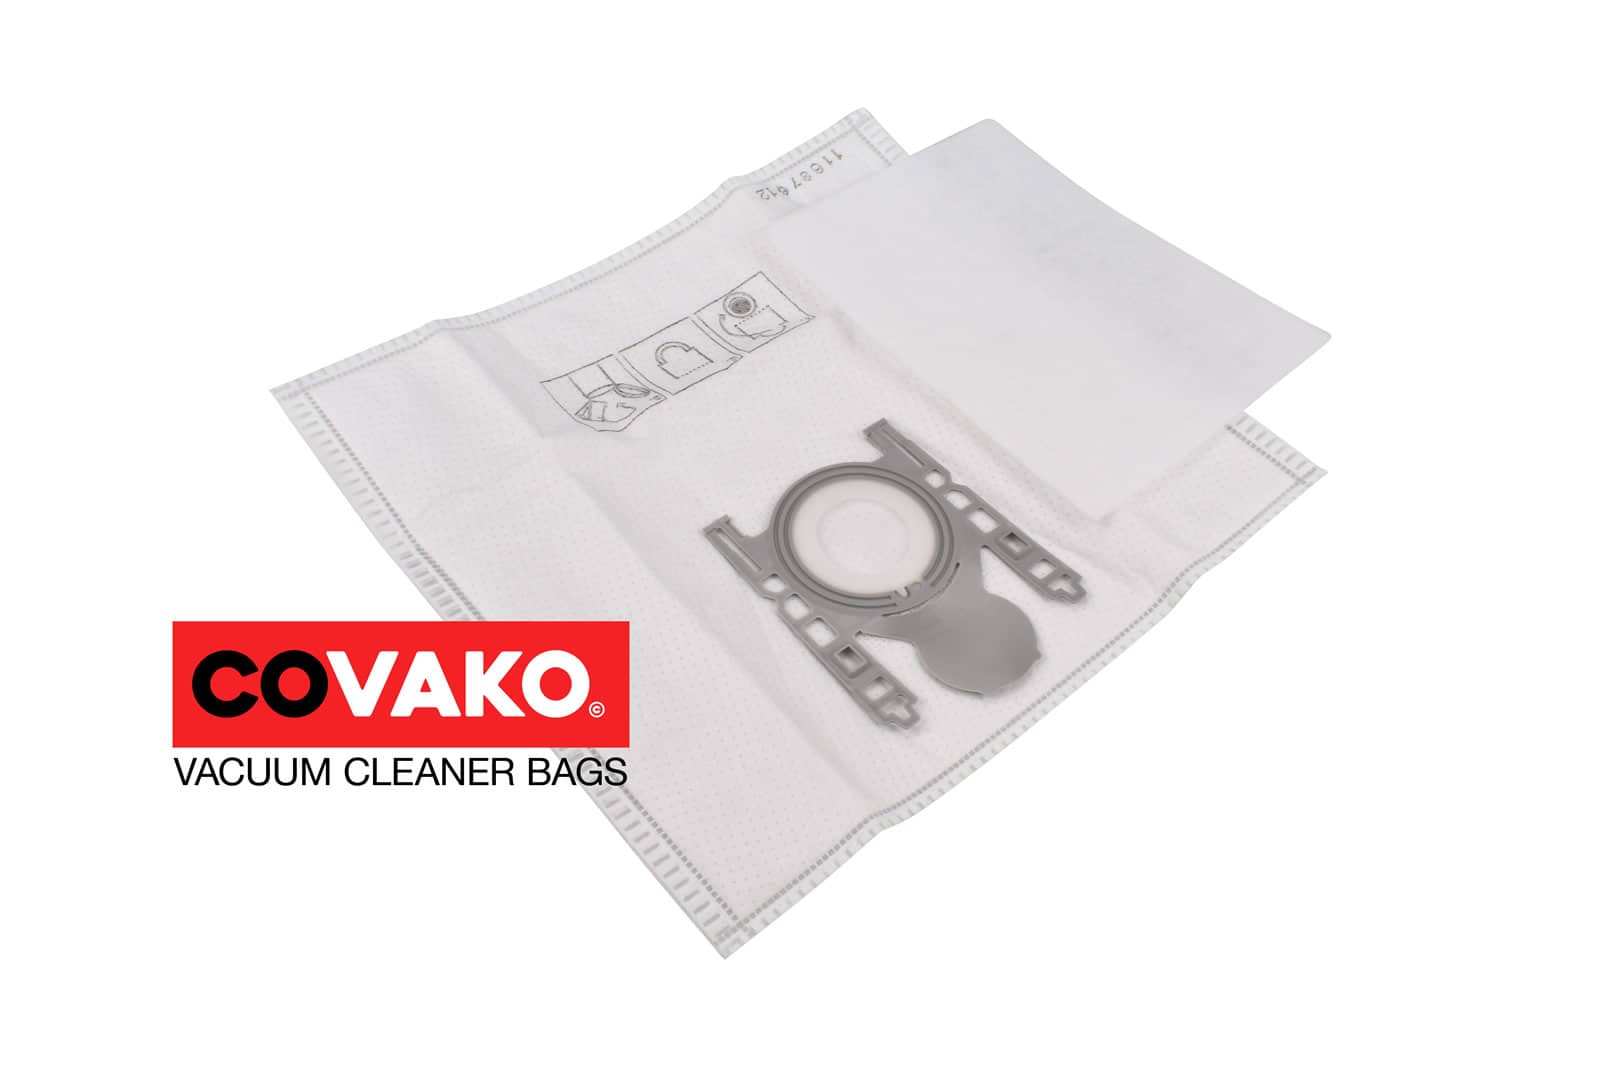 Bosch BSGL 2 Move 1-4 serie / Synthesis - Bosch vacuum cleaner bags